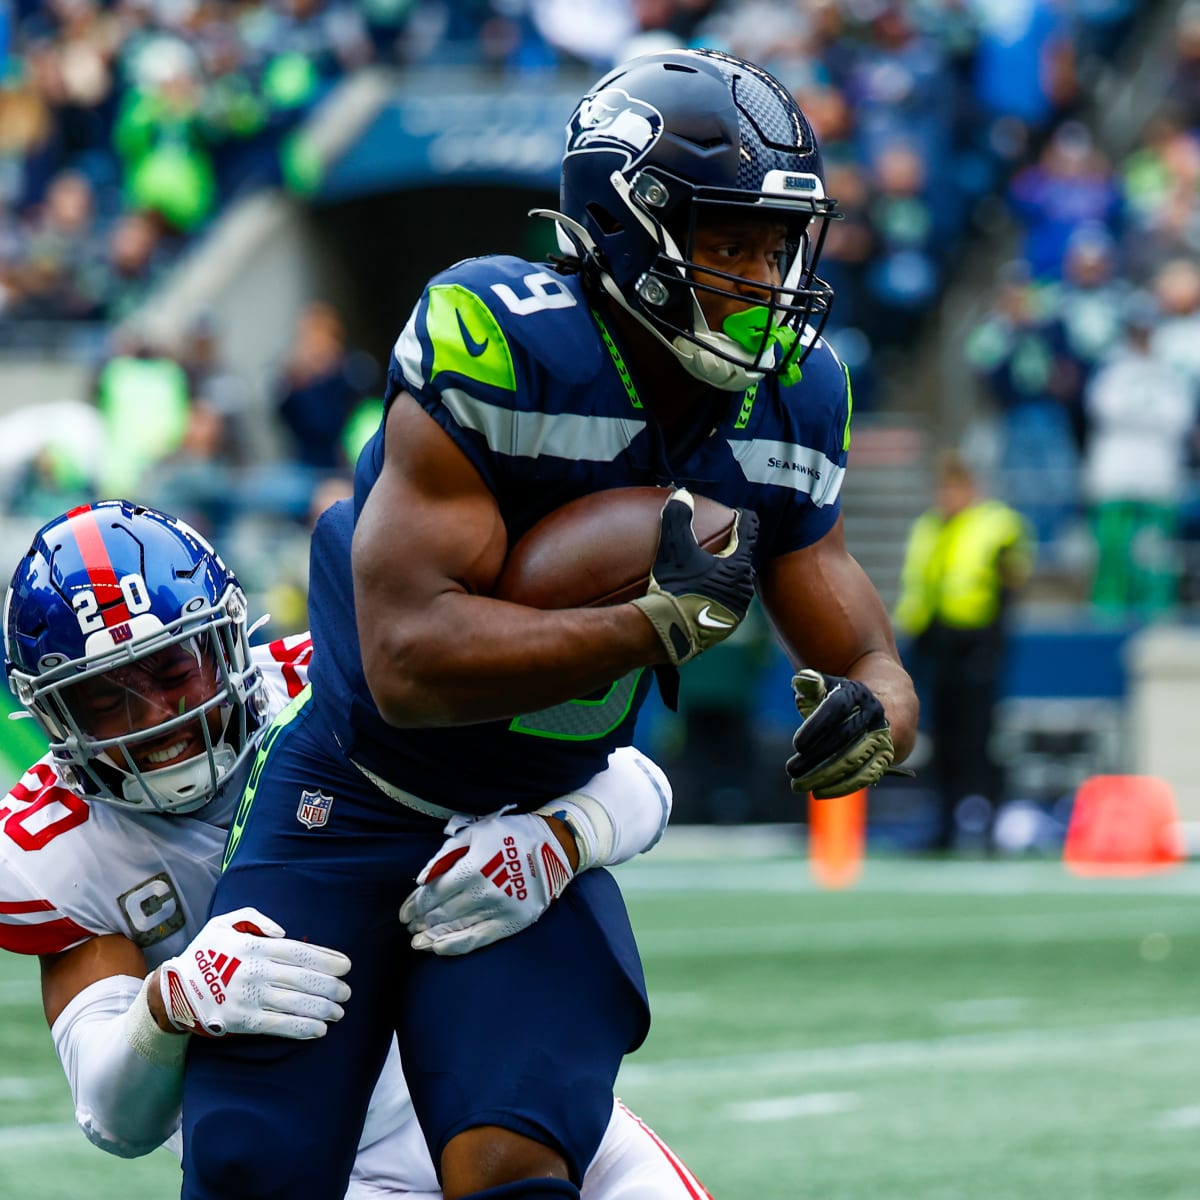 Giants offered Julian Love more than what the Seahawks gave him